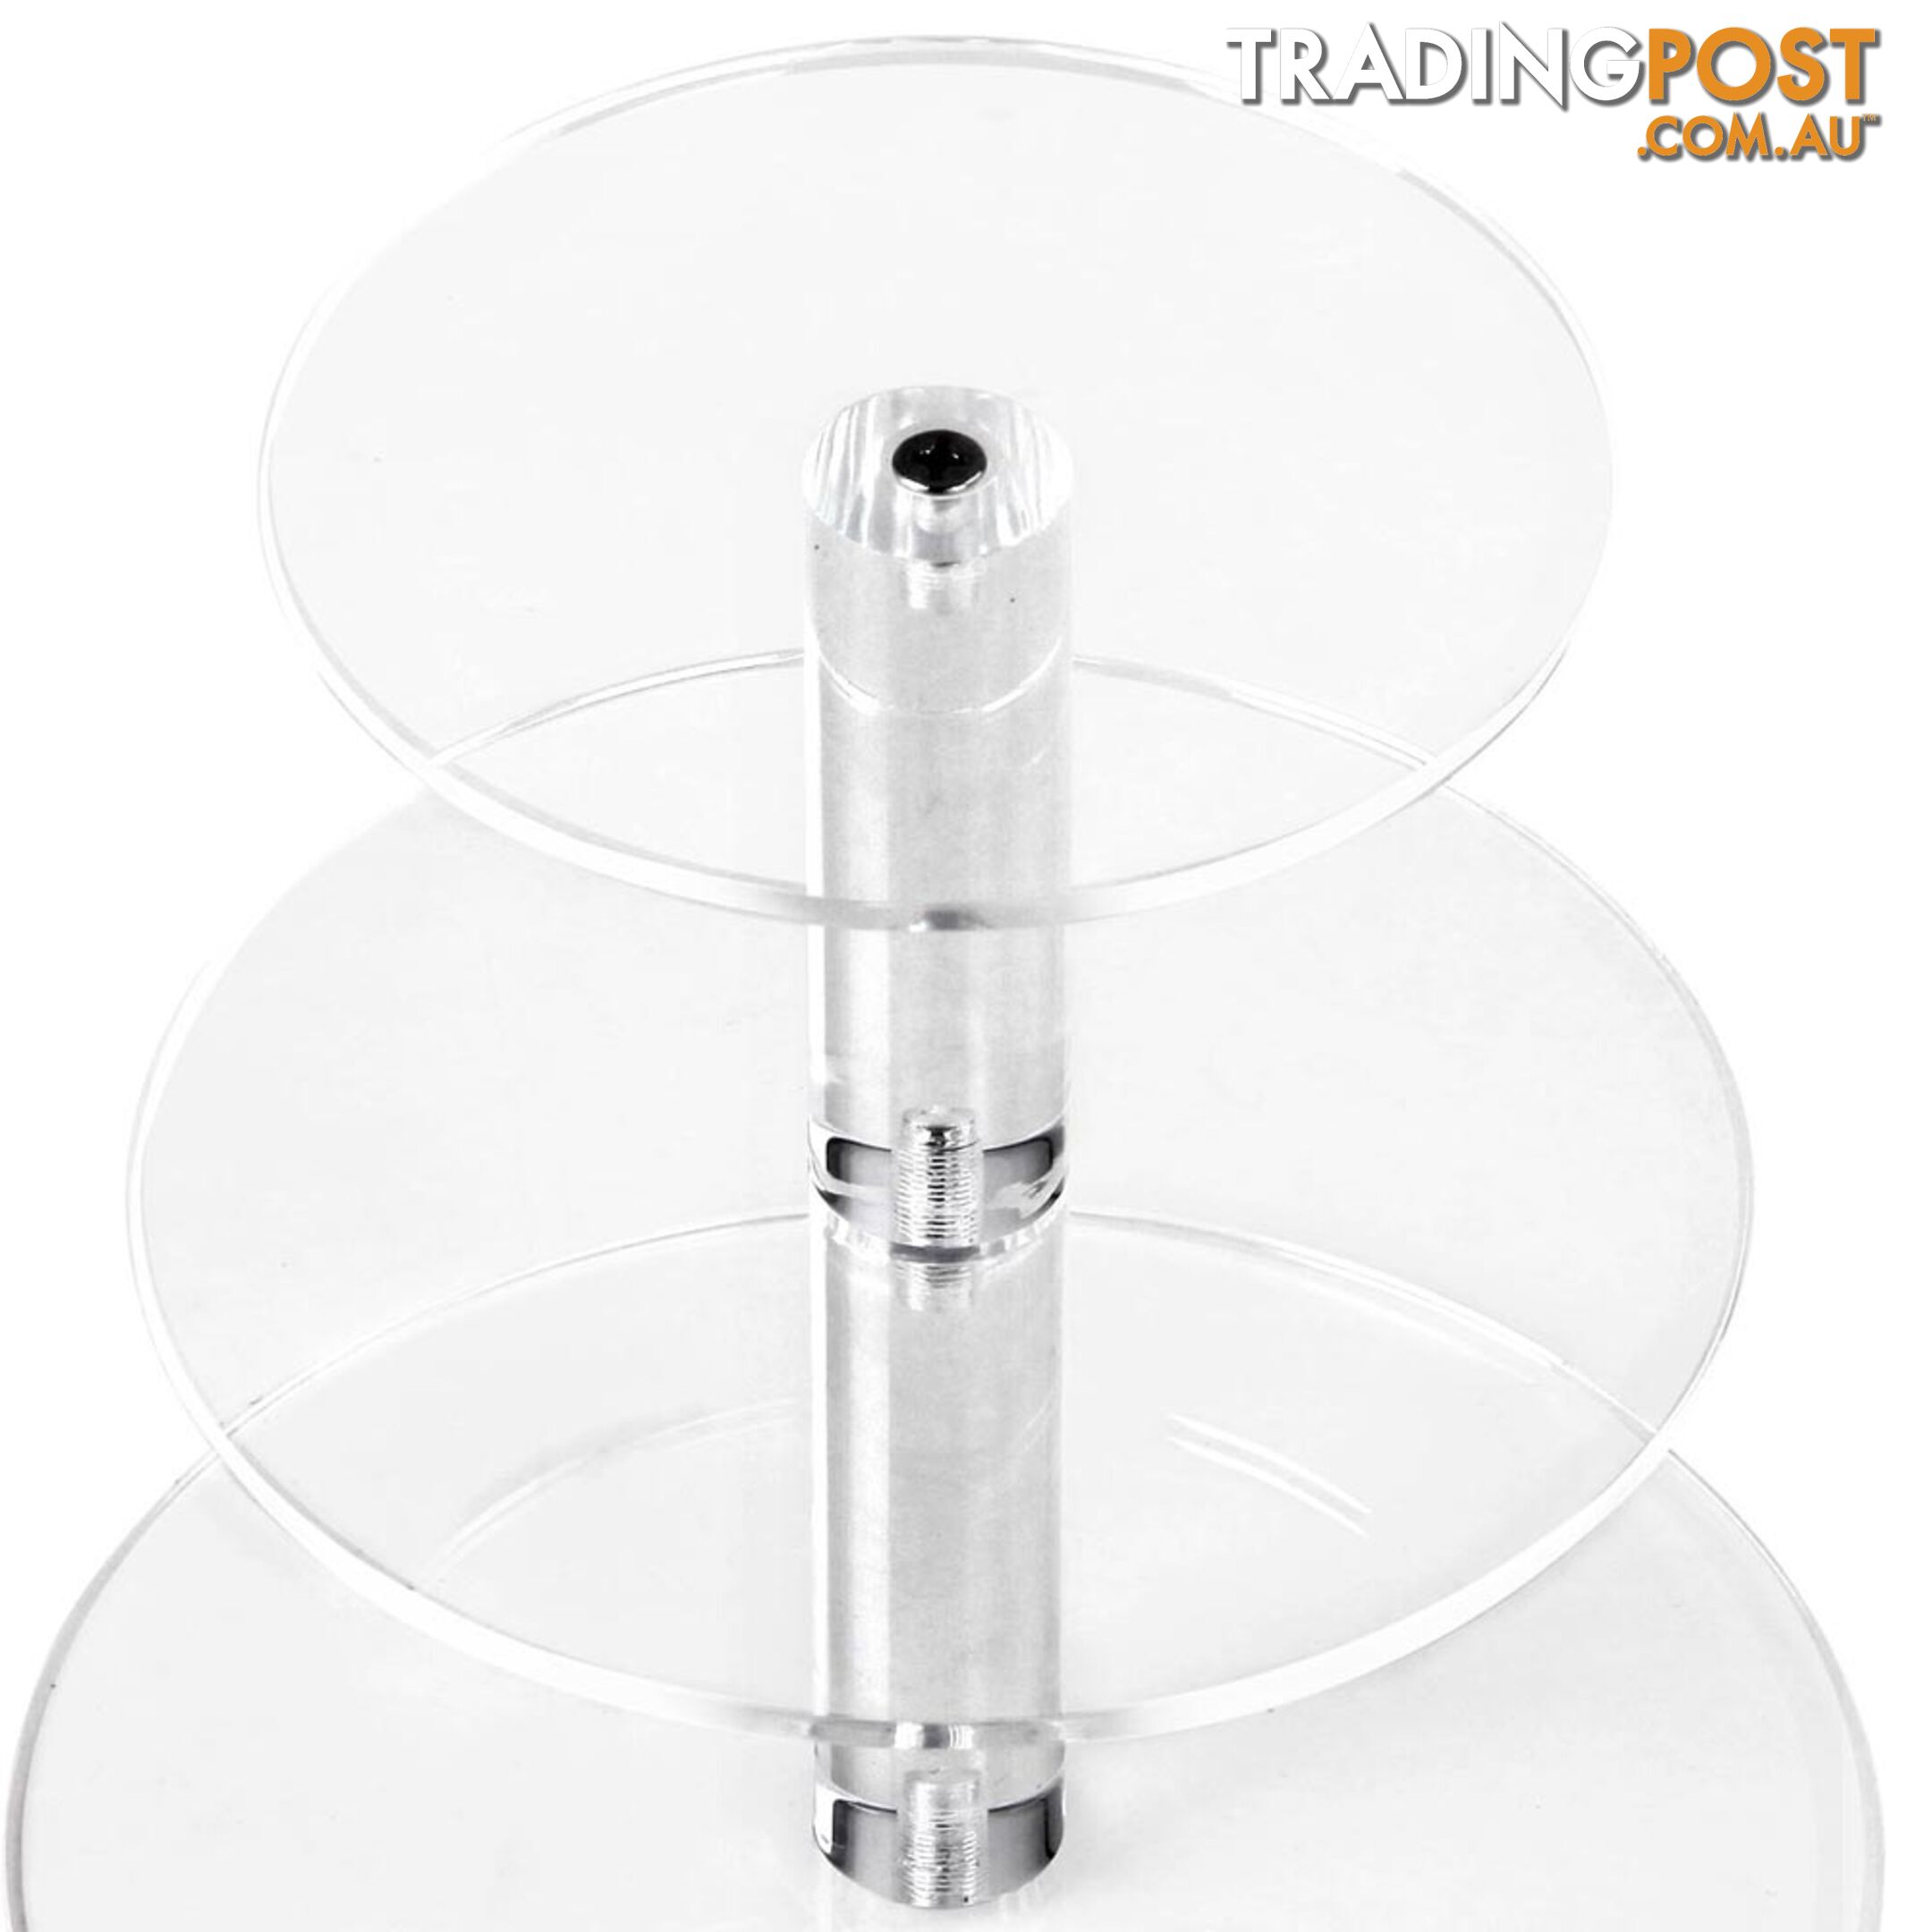 5 Tier Cake Stand Clear Acrylic Display Plate High Tea Wedding Birthday Party